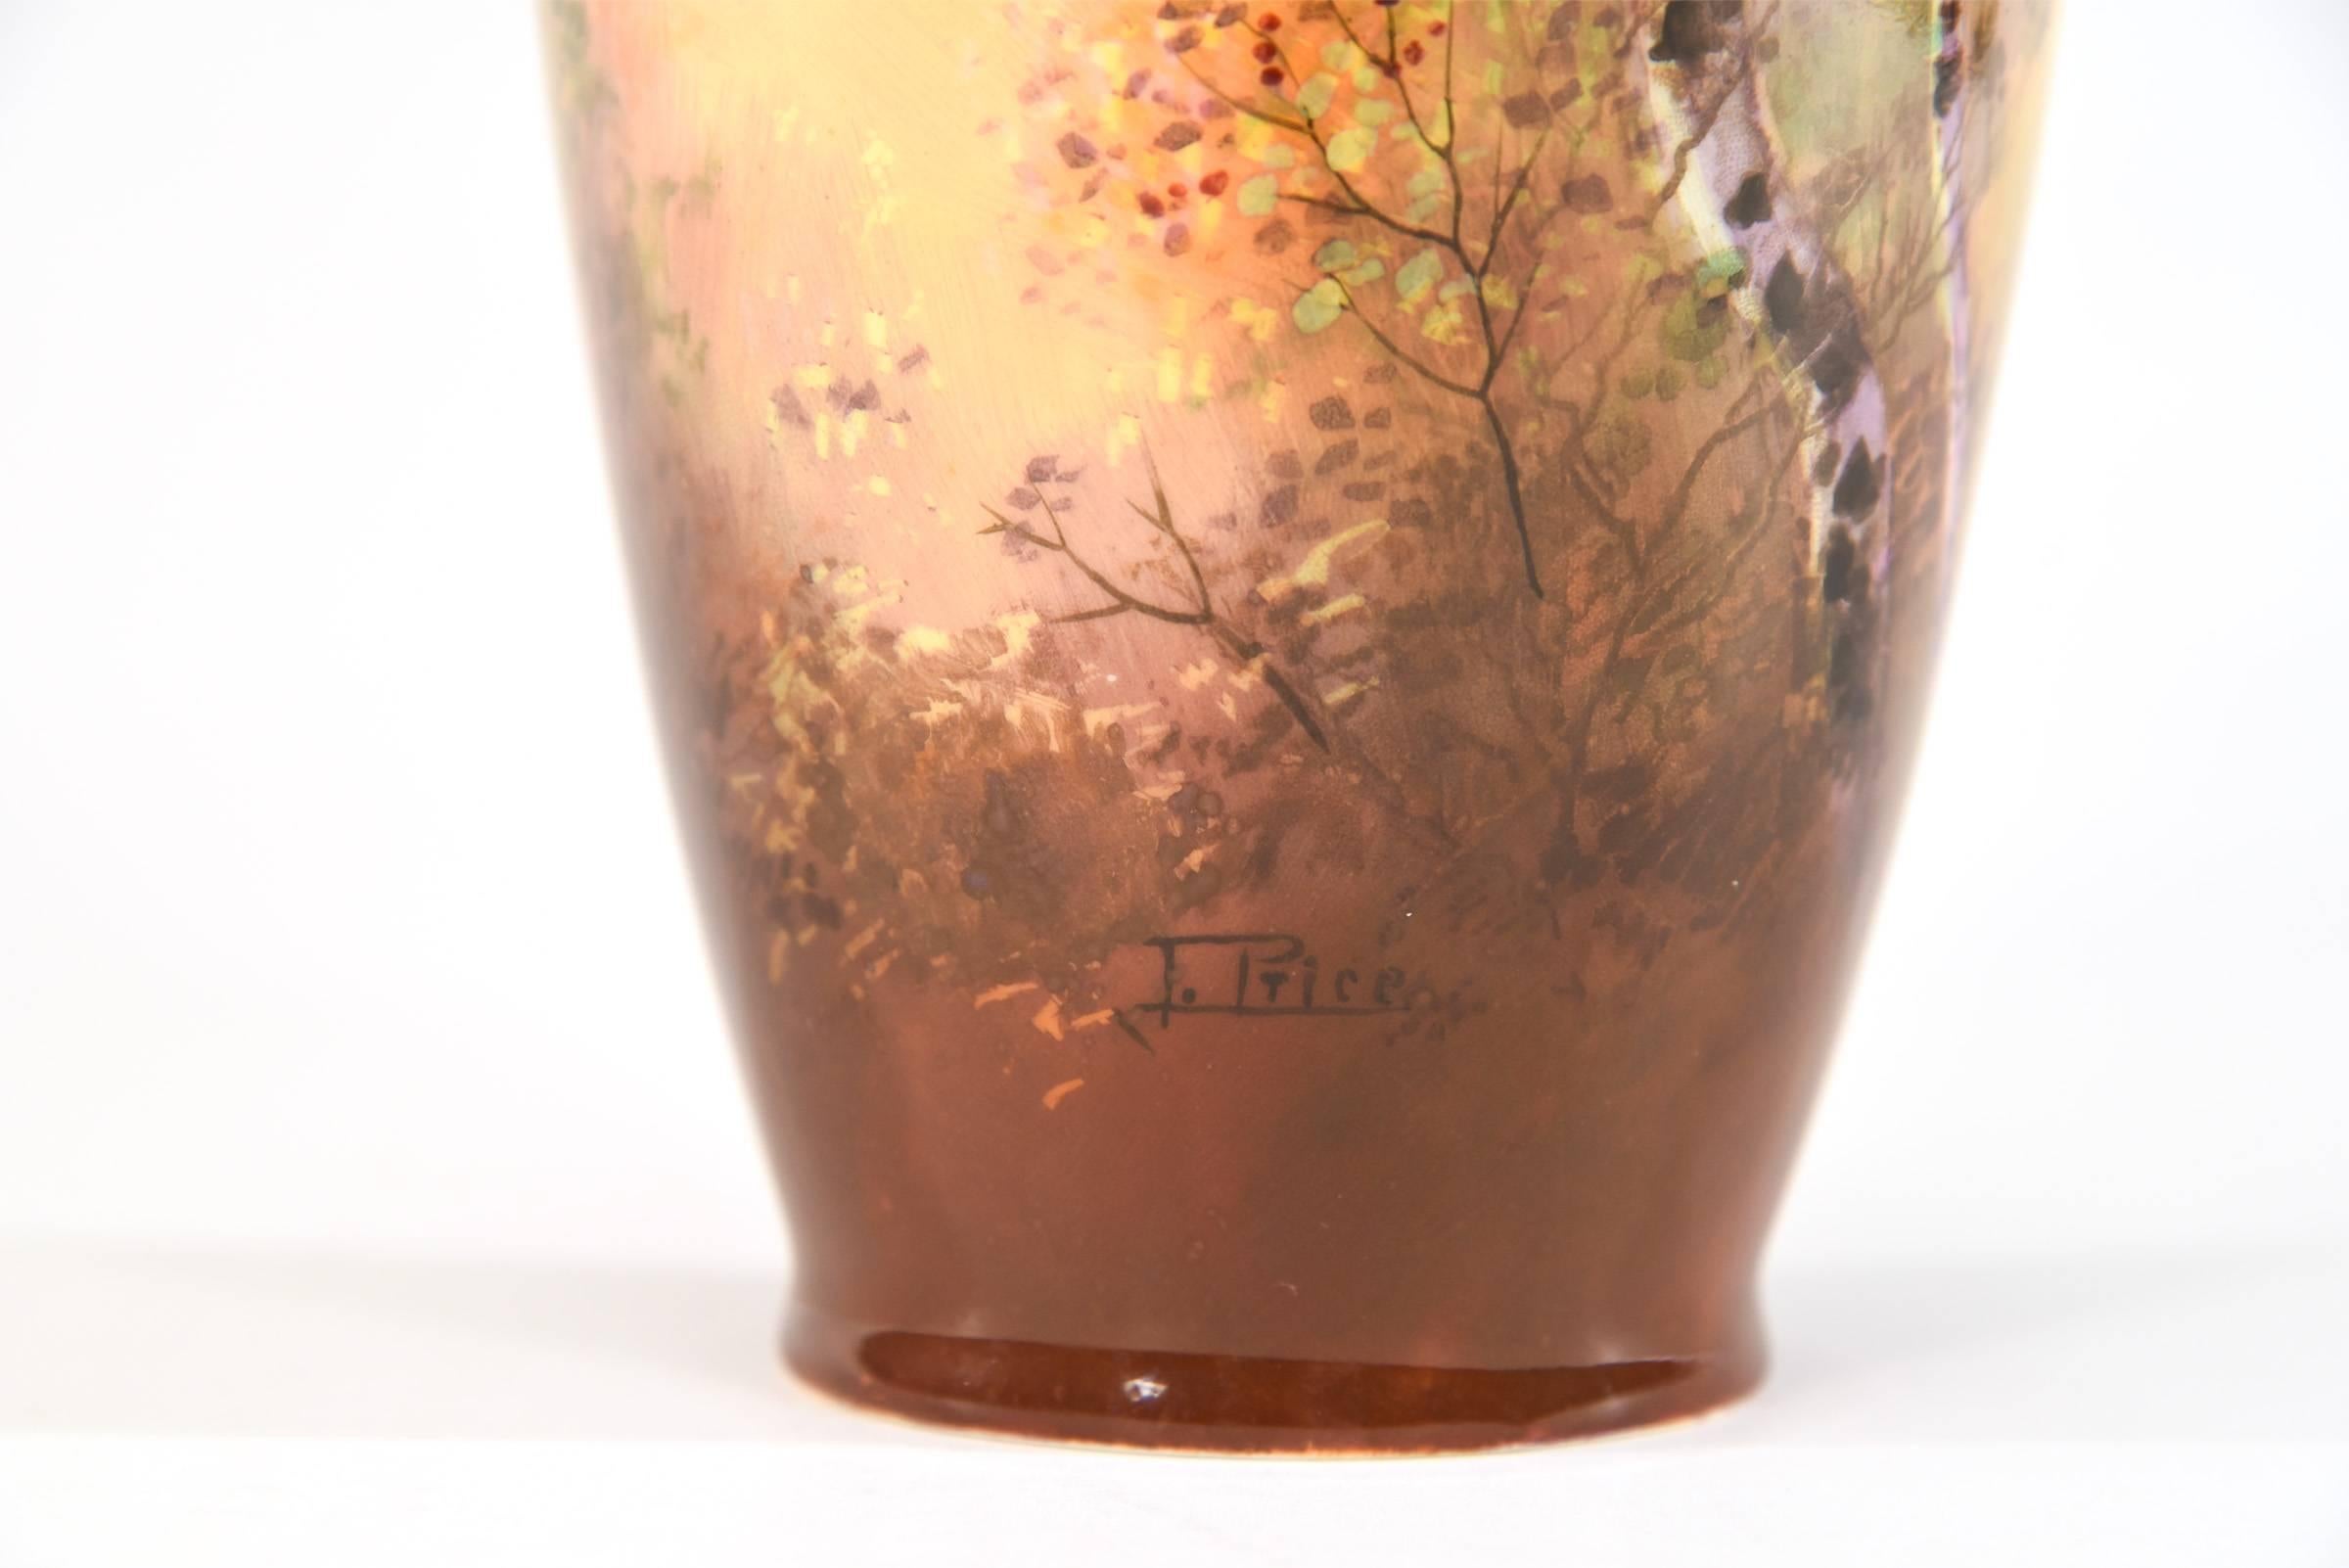 Hand-Painted Royal Doulton Hand Painted Signed Vase w/ Birch Tree Landscape Decoration For Sale